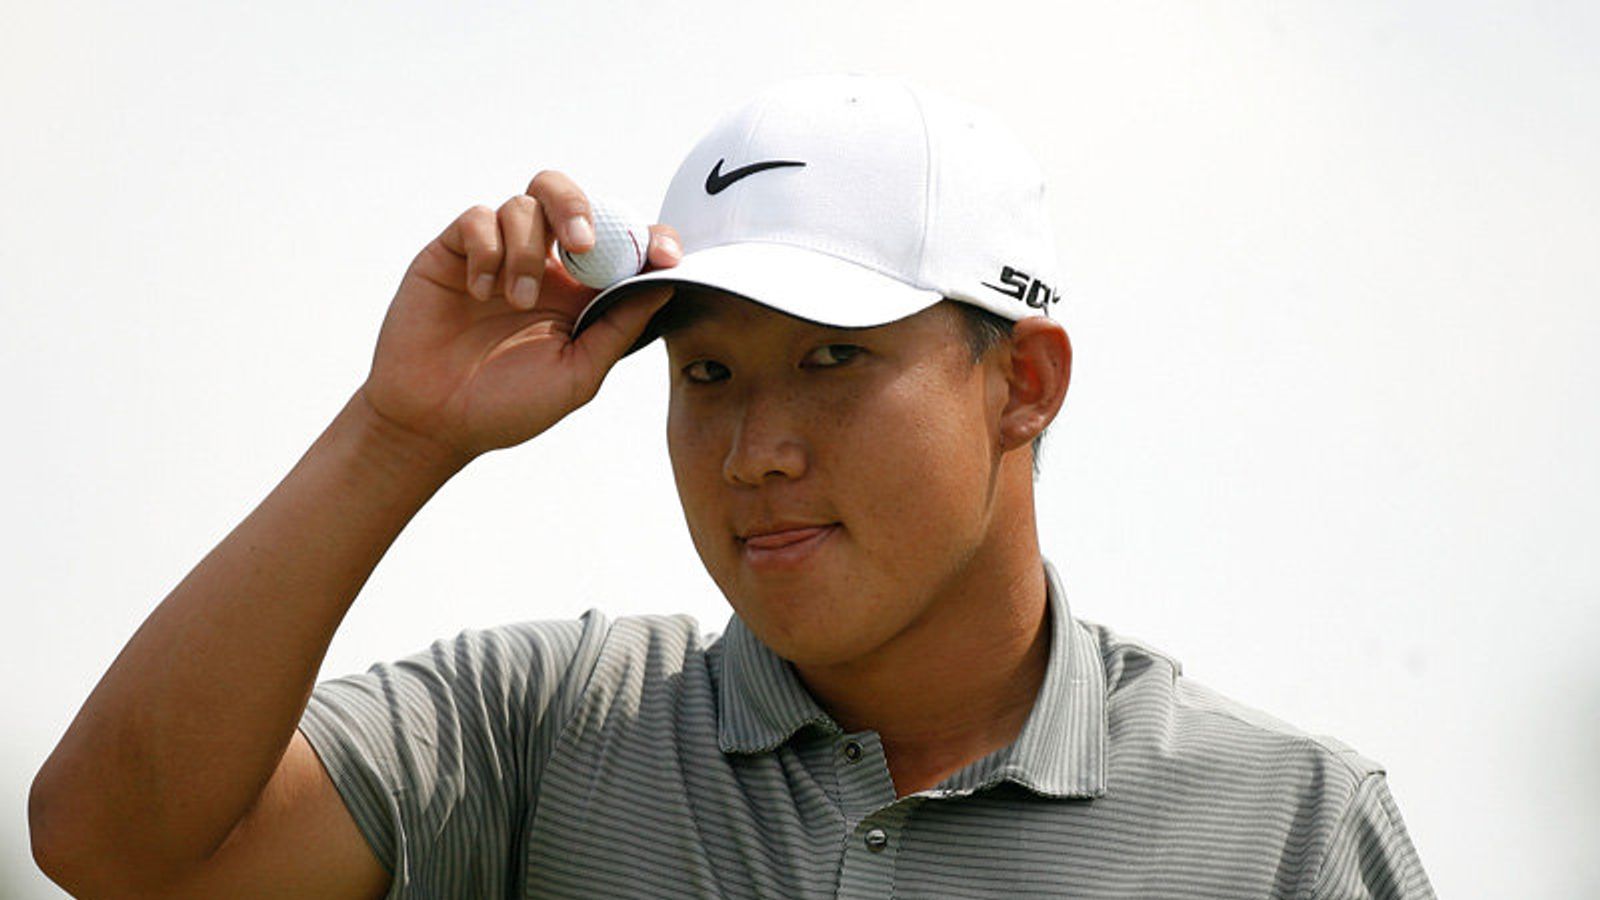 Anthony Kim Wallpapers